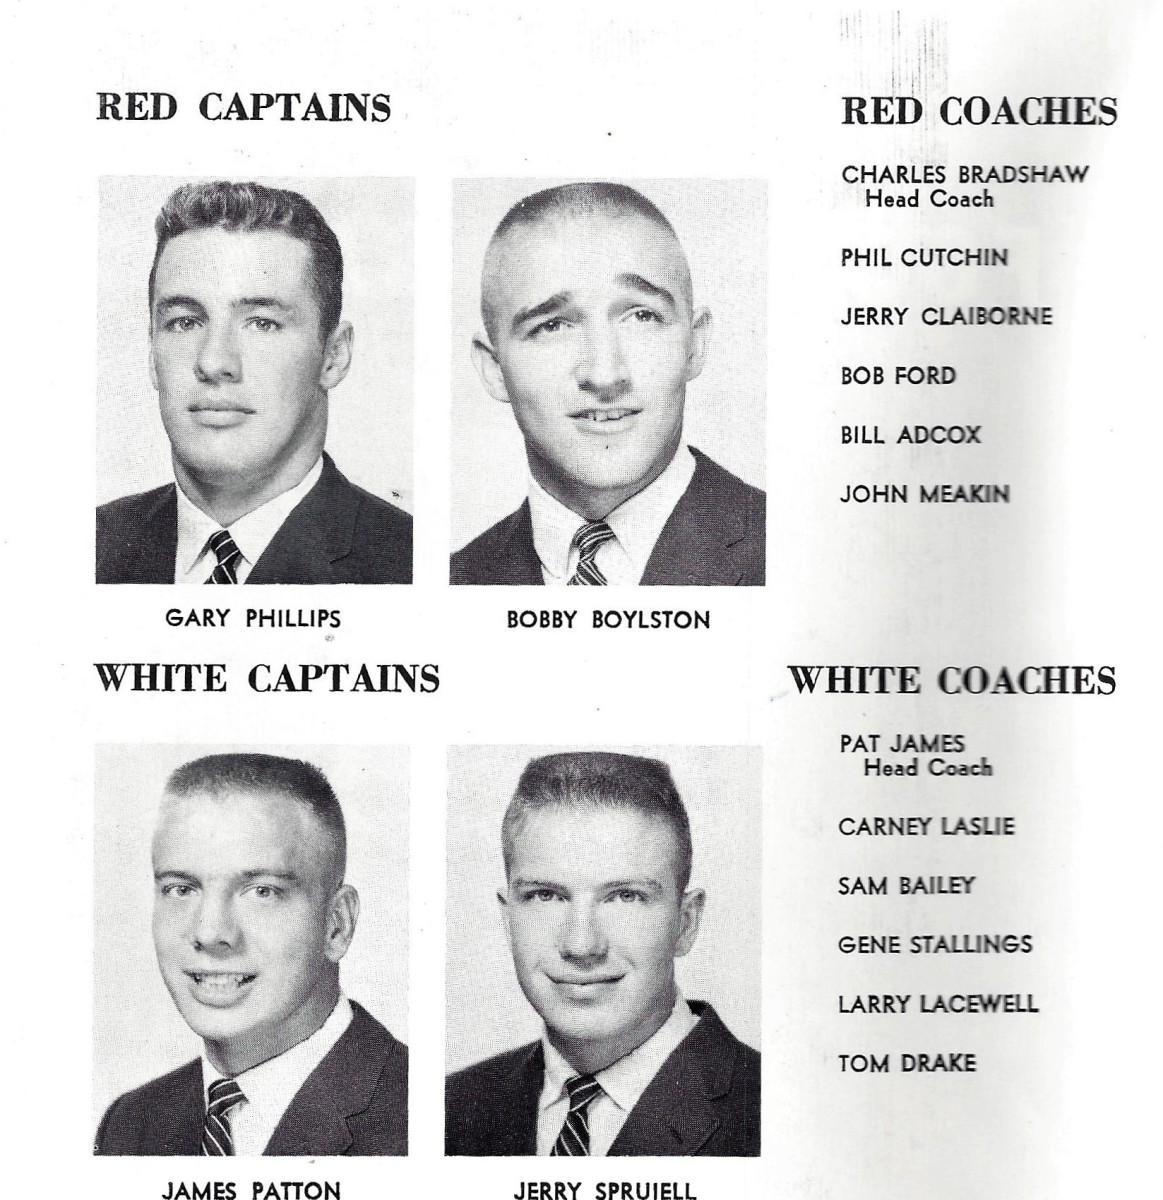 1960 A-Day coaches listing